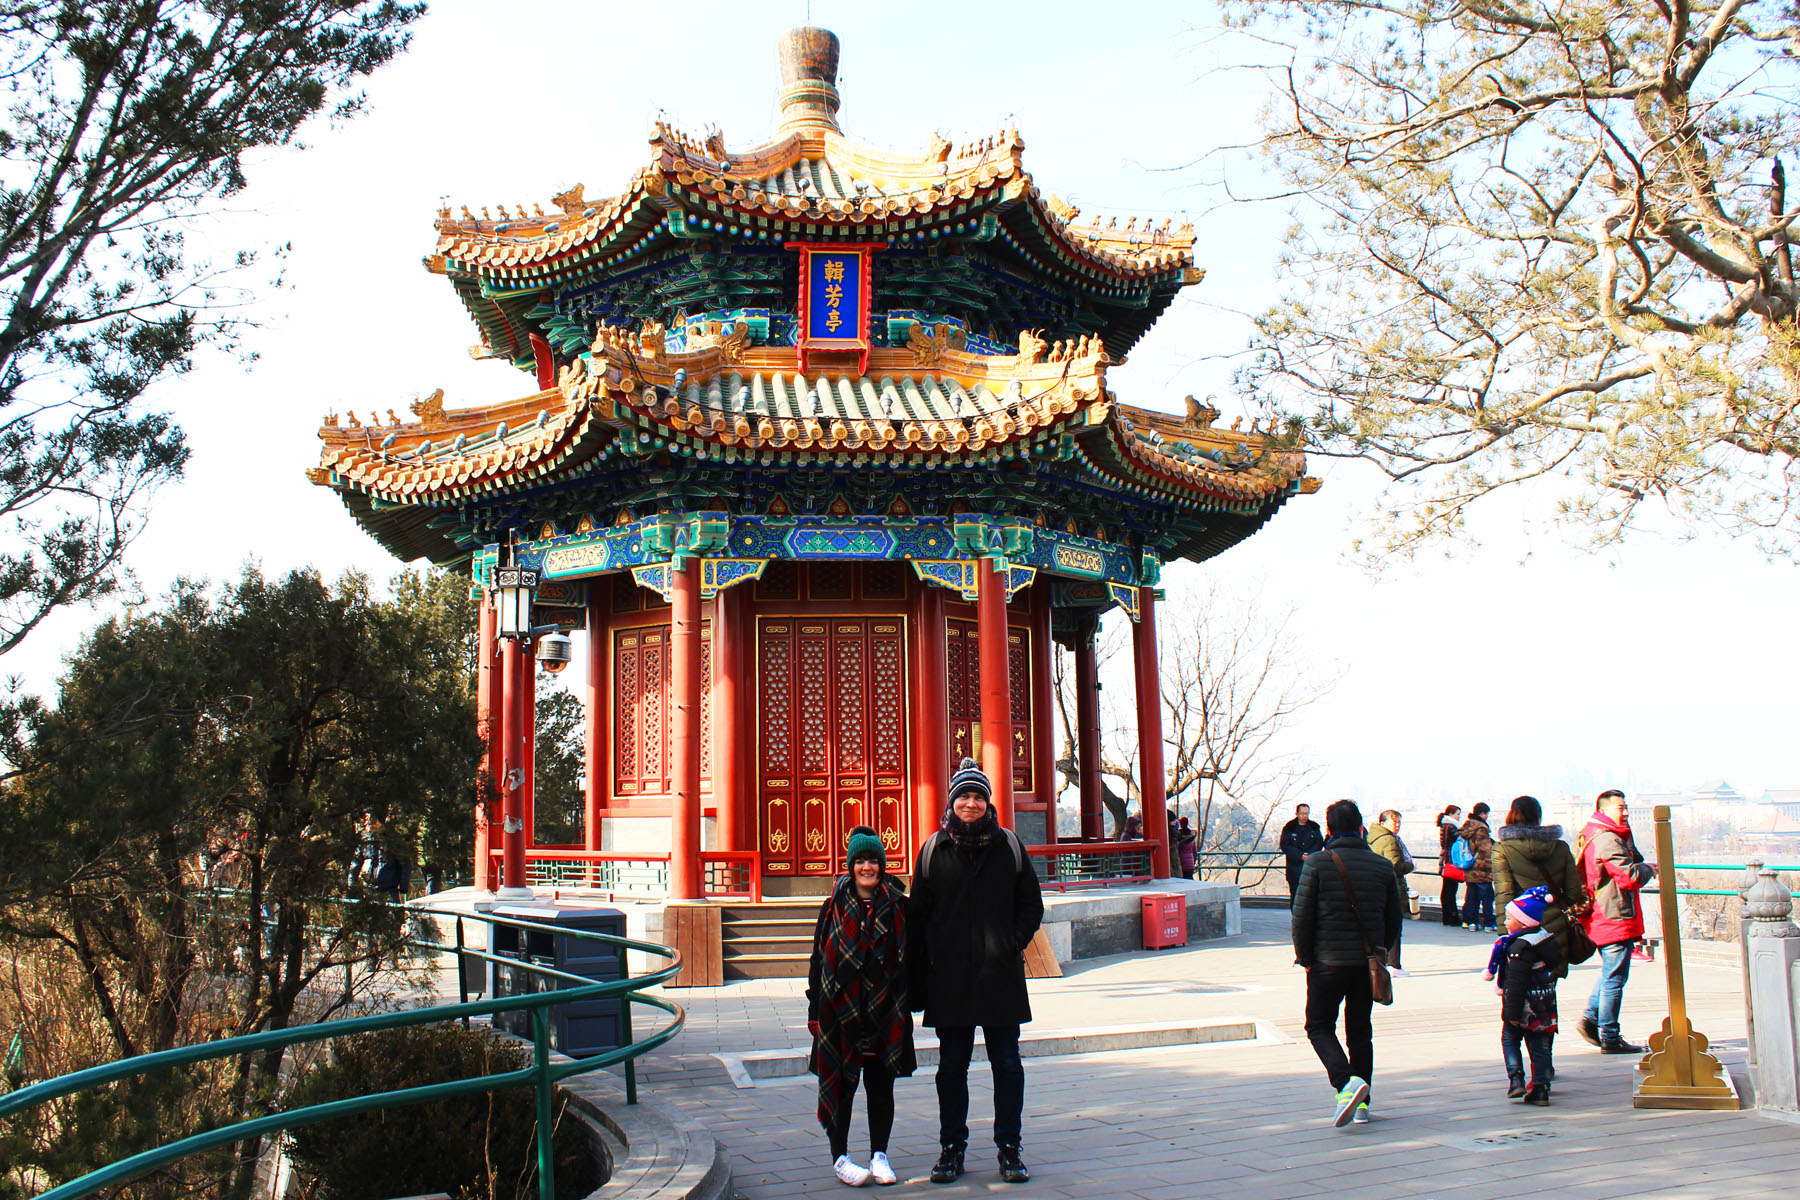 Just north of the Forbidden City is a beautiful park with panoramic views. Perfect romantic spot!